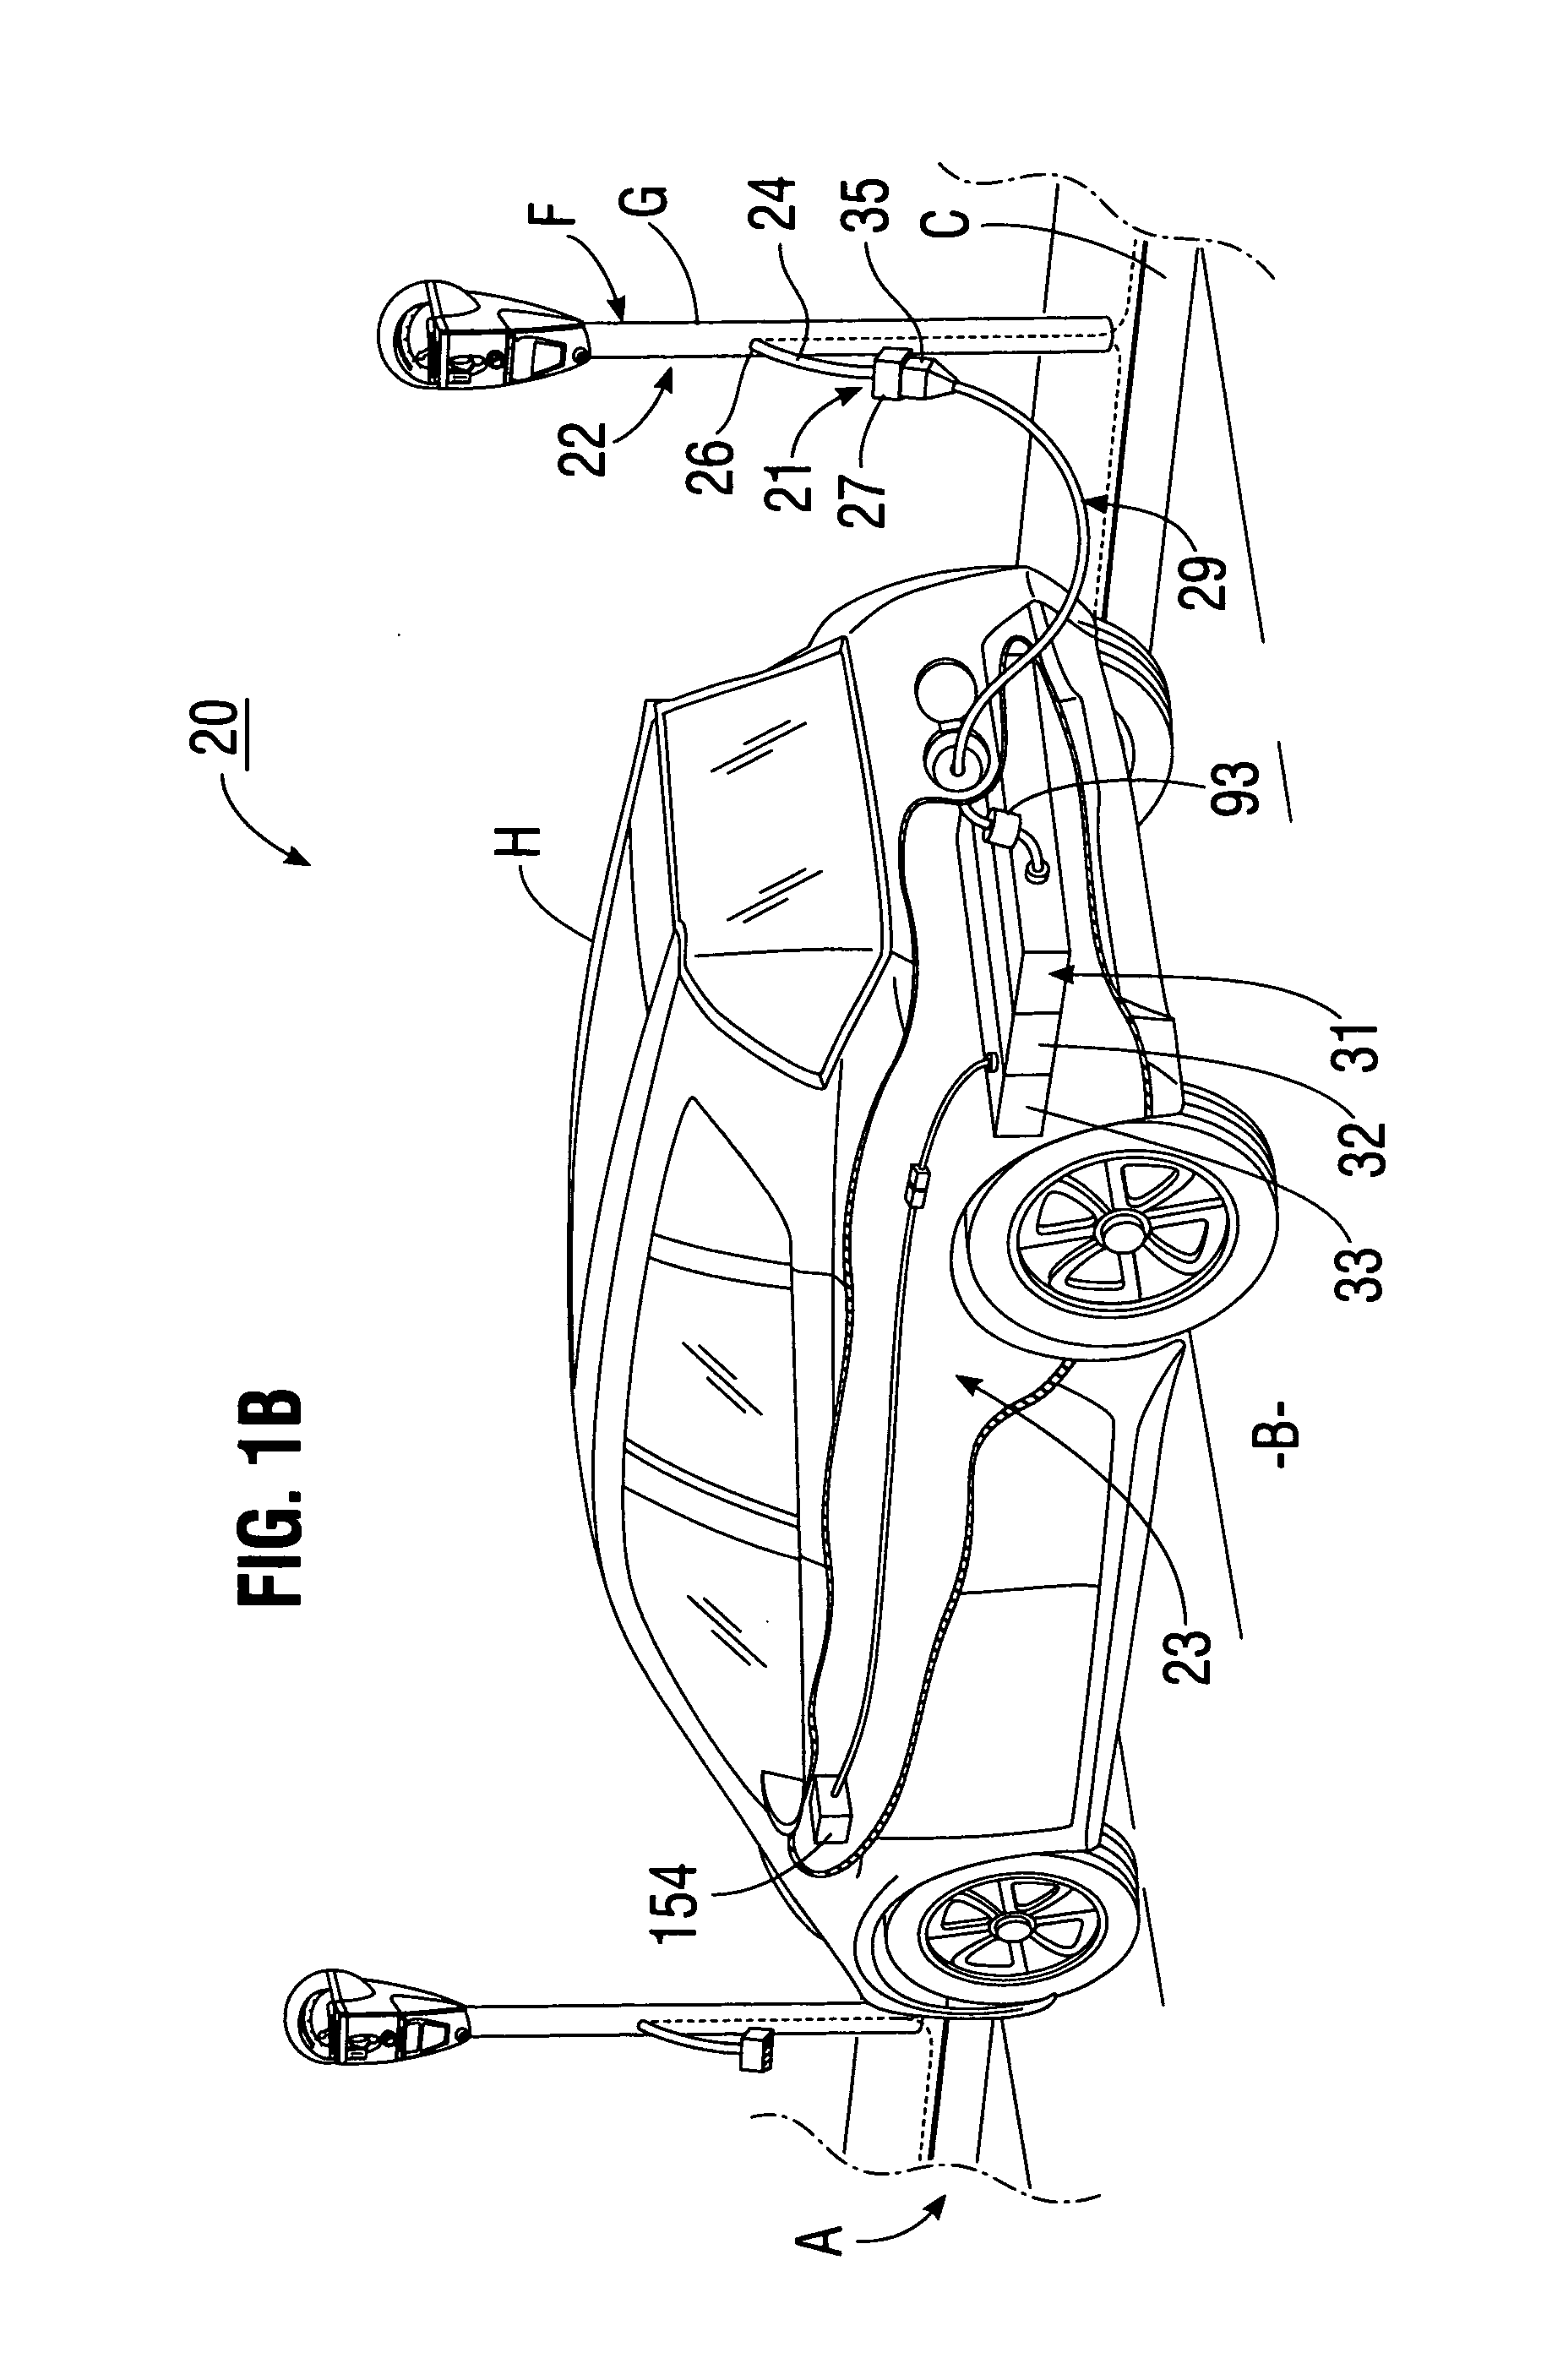 System for charging electric vehicle batteries from street lights and parking meters